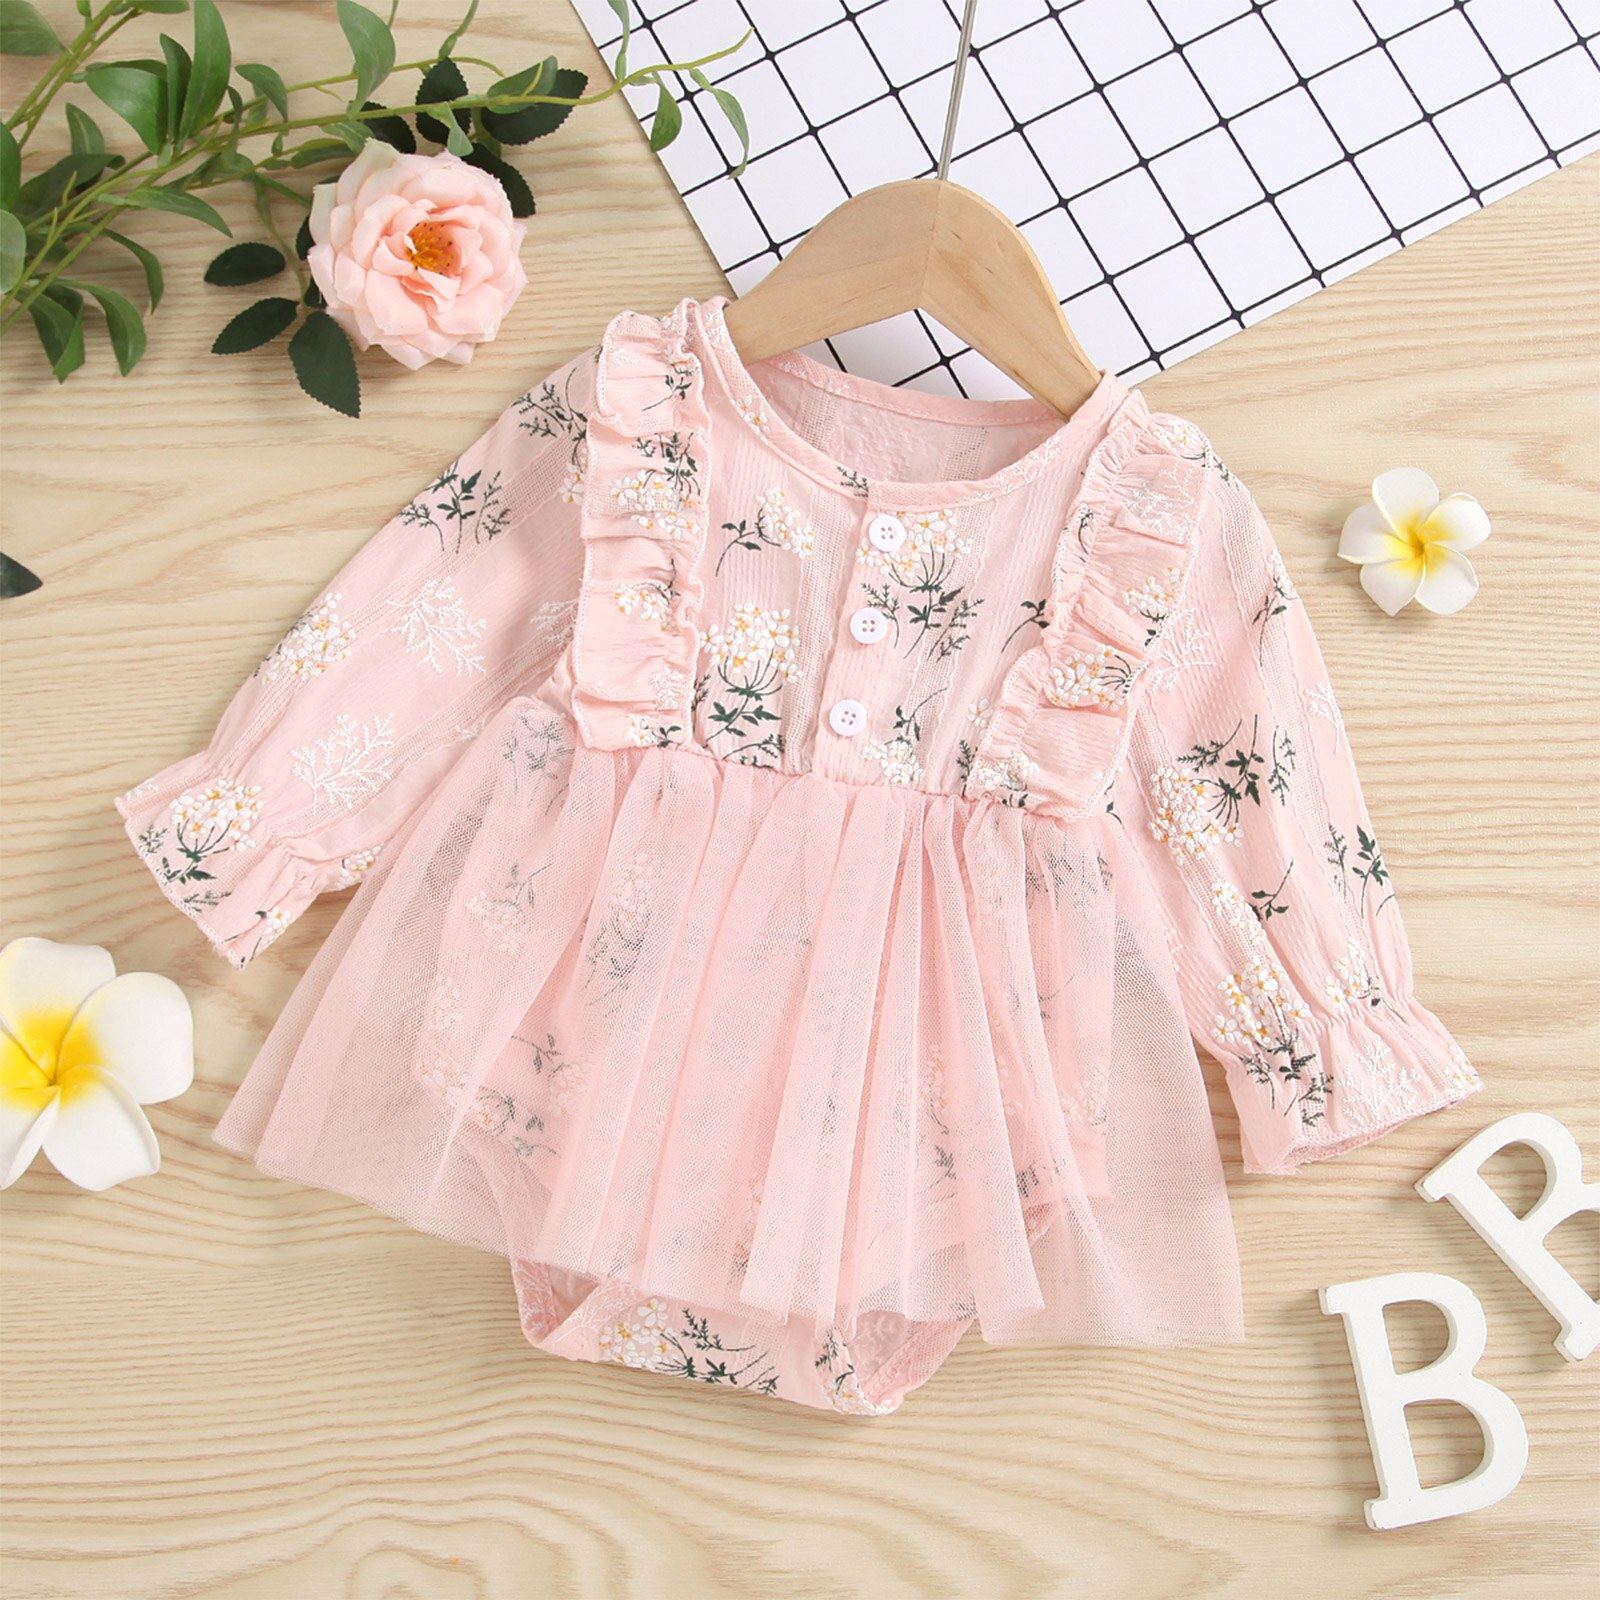 Ma-Baby-0-18M-Infant-Newborn-Baby-Girls-Rompers-Lace-Floral-Jumpsuit-Playsuit-Outfits-Autumn-Spring-2